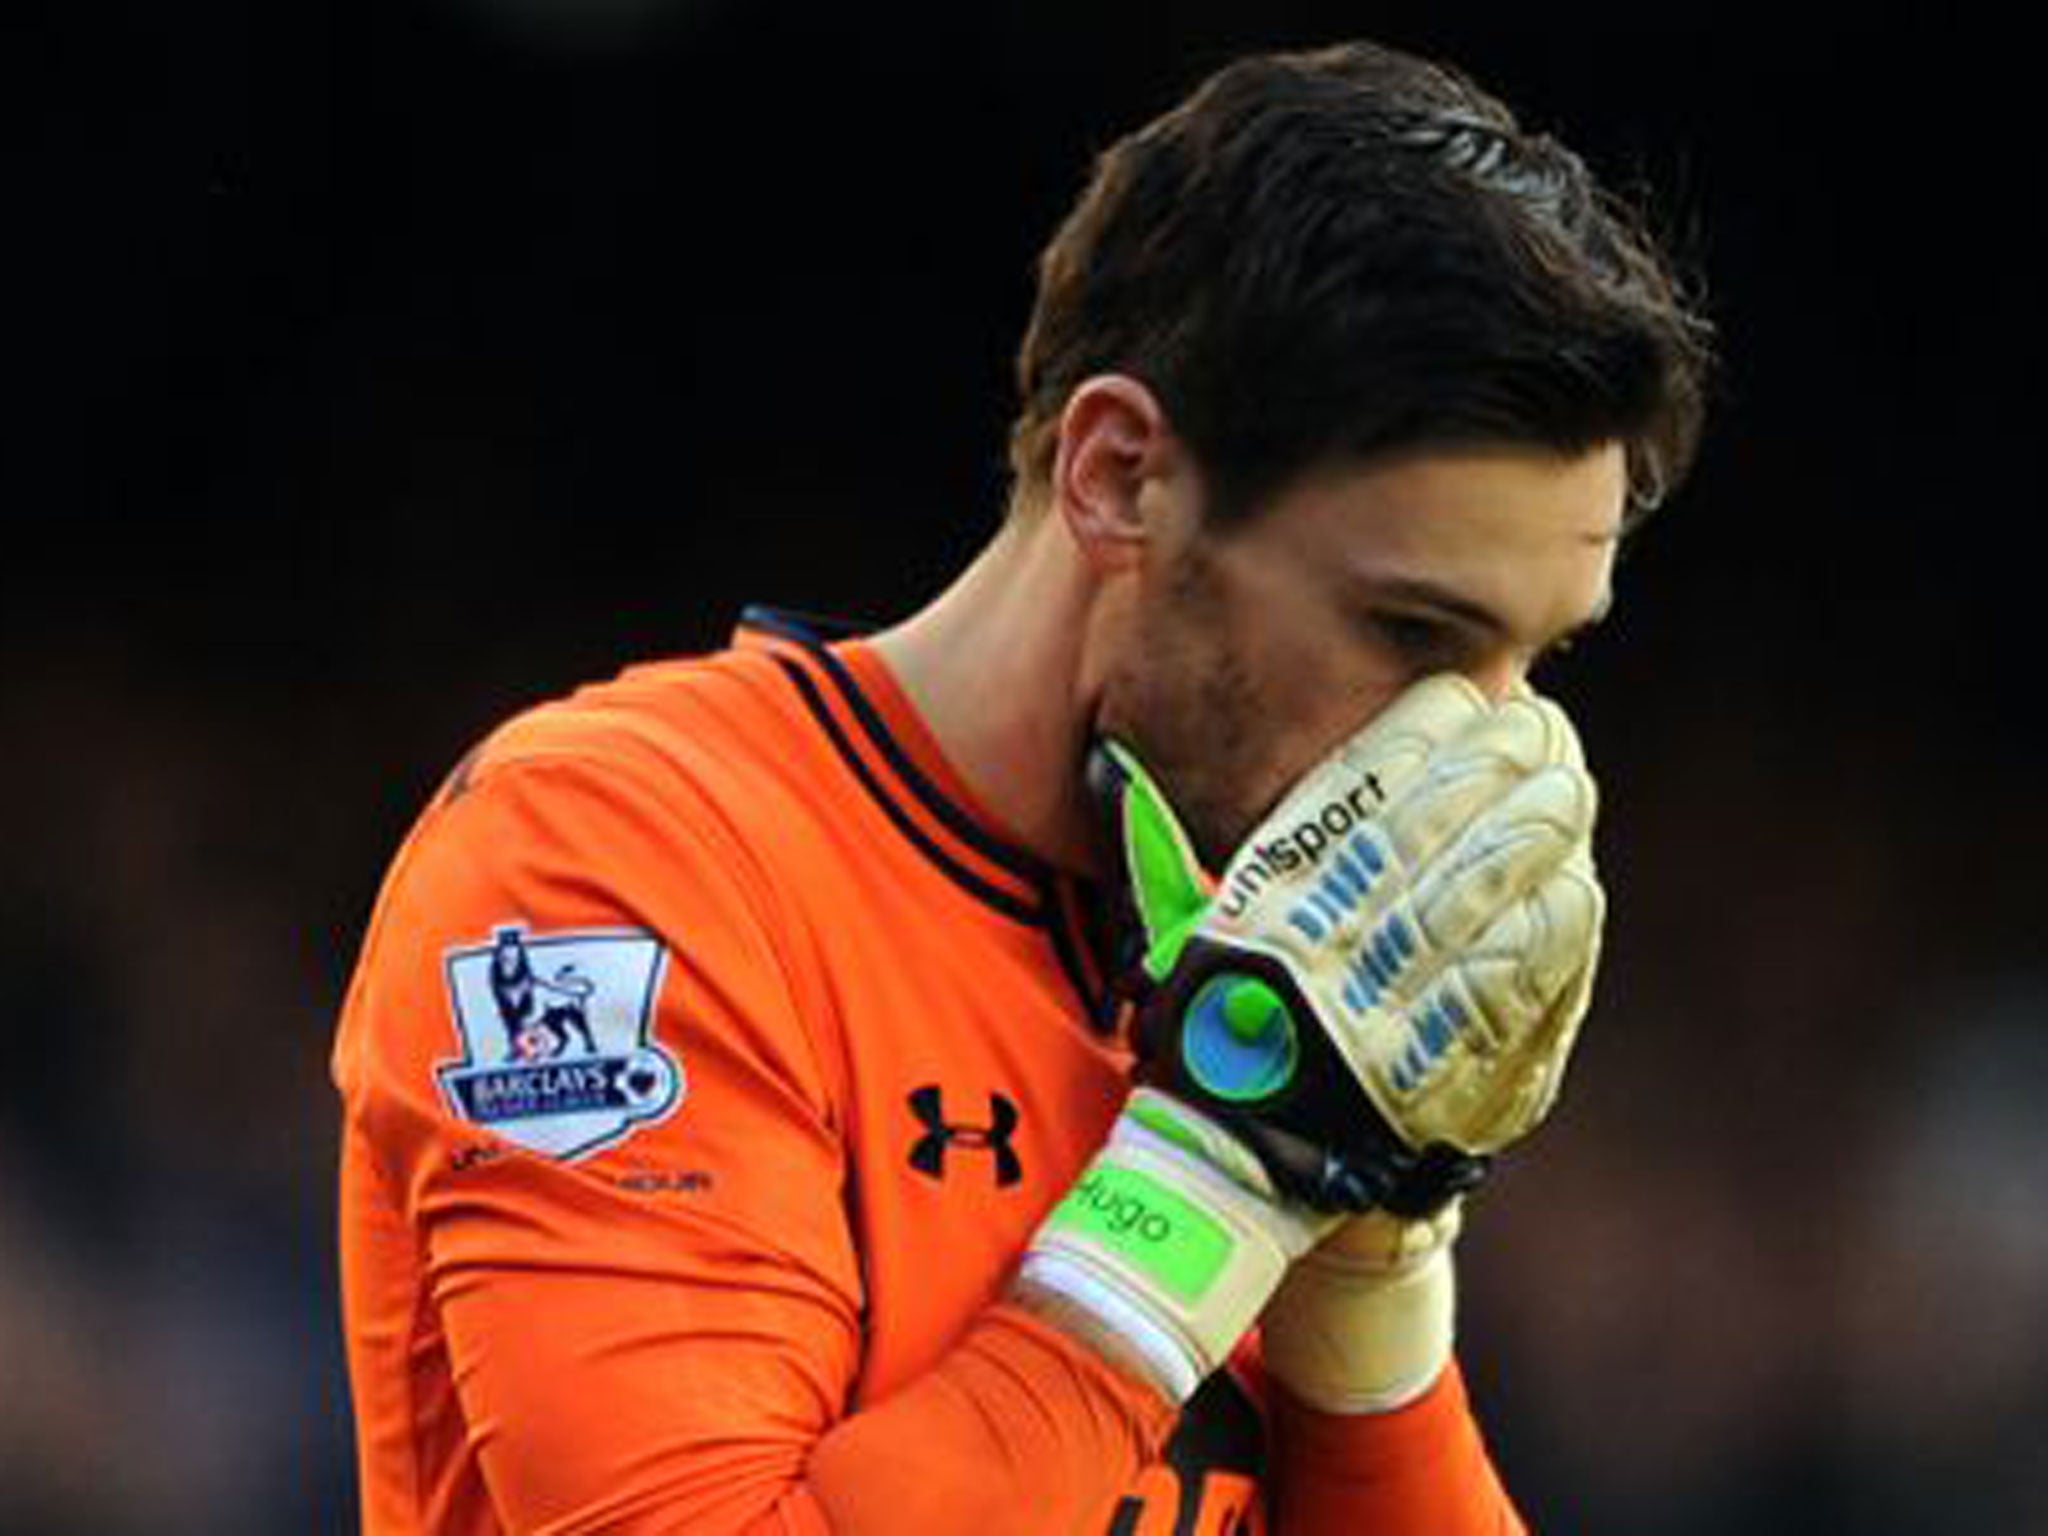 Hugo Lloris stays on the field during Tottenham's draw with Everton despite being having earlier lost consciousness